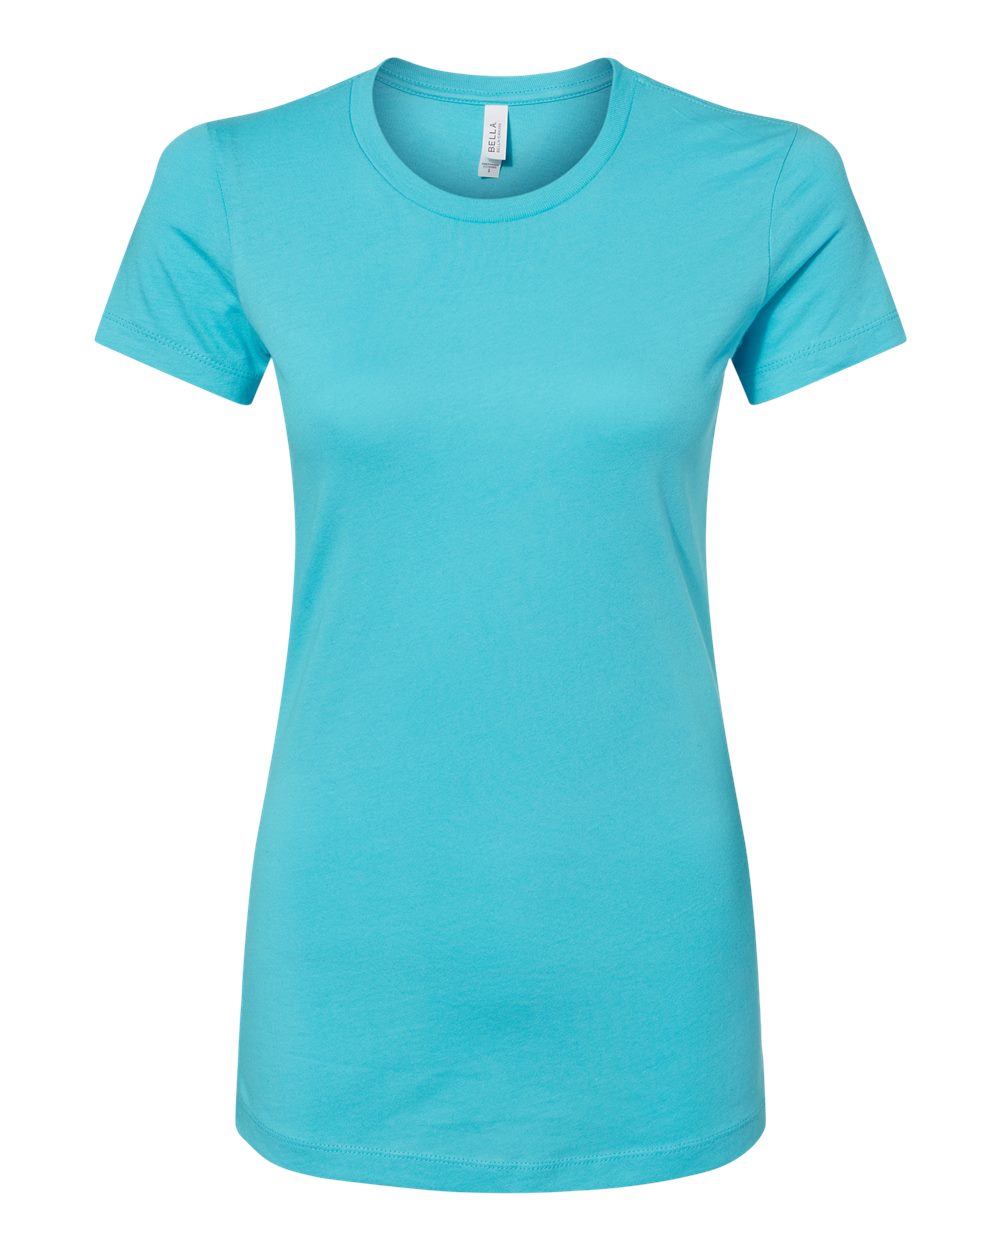 bella+canvas womens tee turquoise